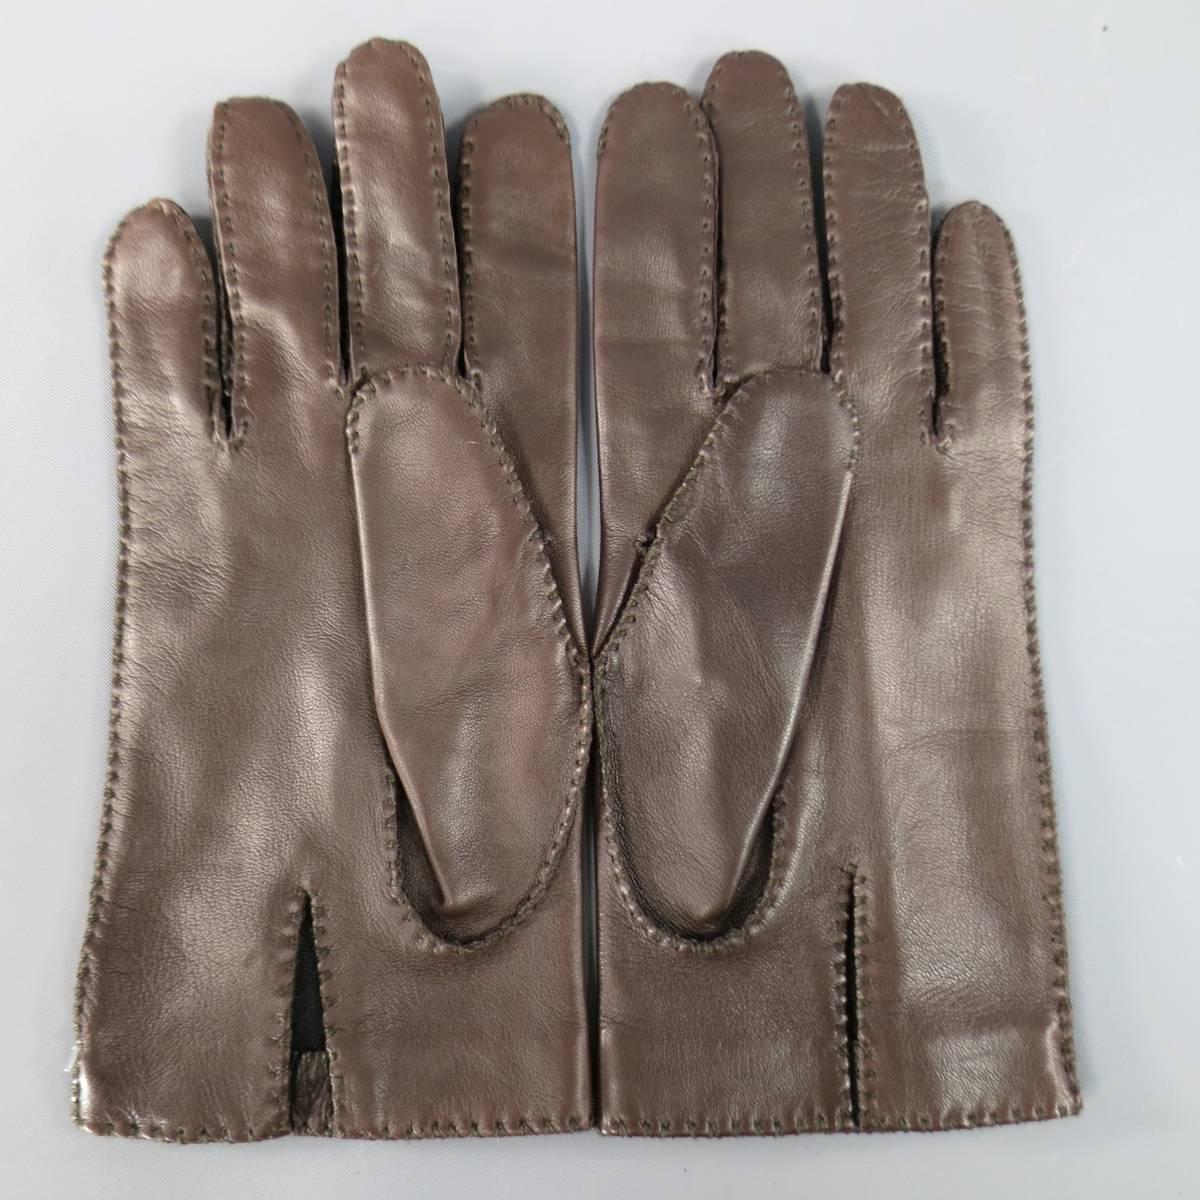 Women's or Men's Vintage Deadstock HERMES Size 8 Brown Leather Top Stitch Gloves